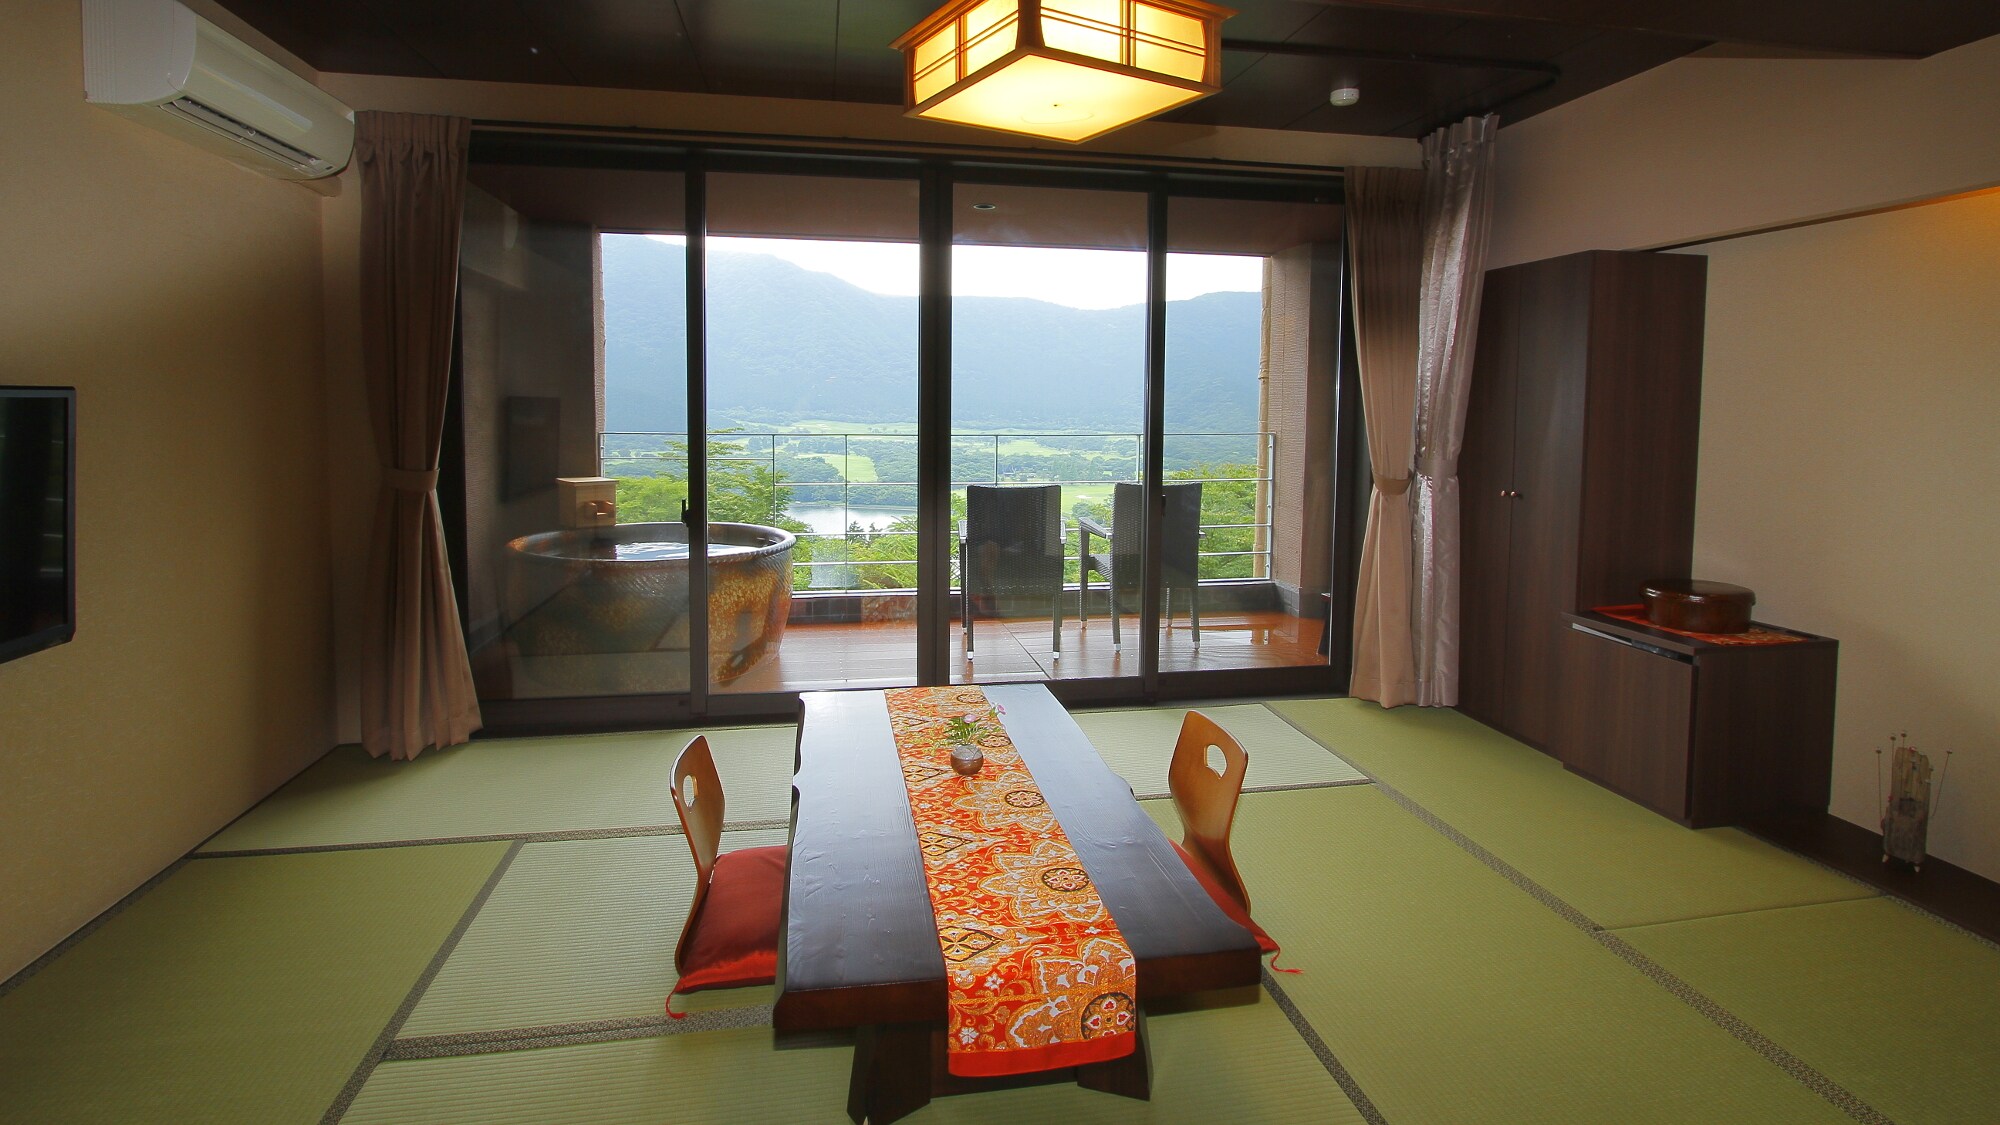 An example of a guest room with an open-air hot spring bath (nebula, bright star, blue-eyed star, star shadow)